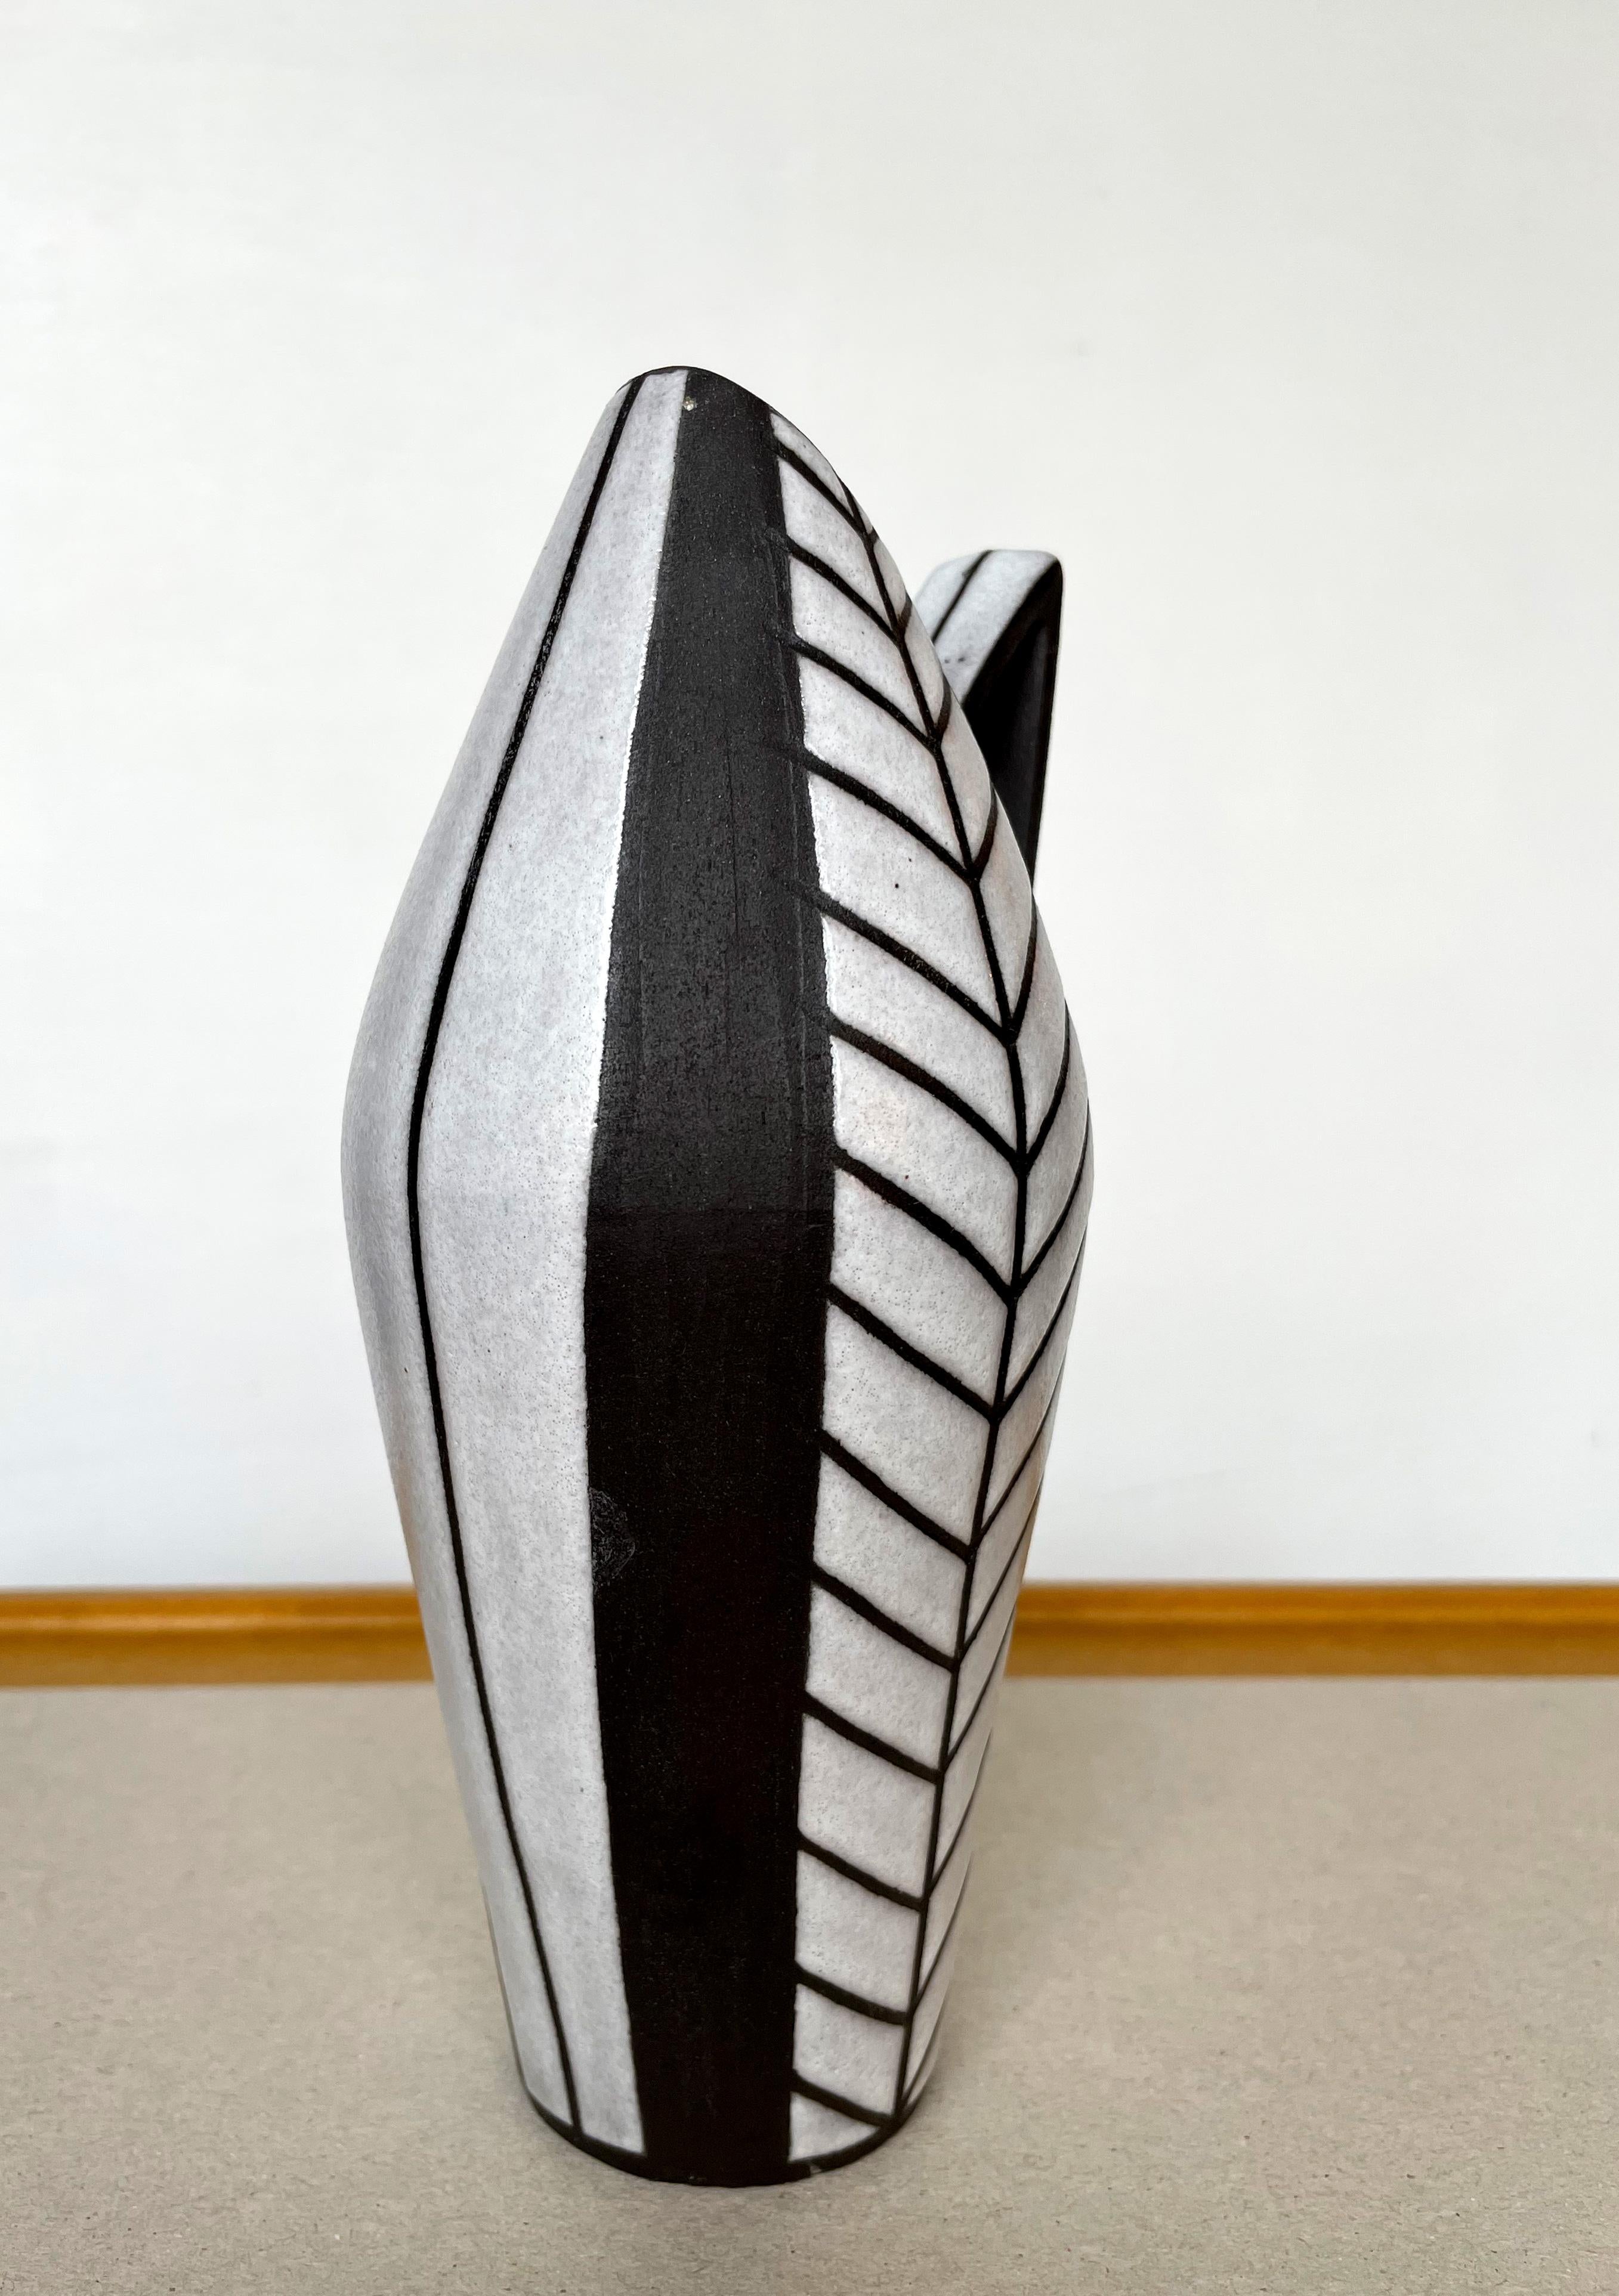 Handmade Danish Mid-Century Modern vase with strong graphic decor from the Tribal / Harlekin series by Marianne Starck (1931-2007) in the 1950s. Shiny bone white glaze with hand-carved graphic lines on the curved, elegant shape in raw anthracite